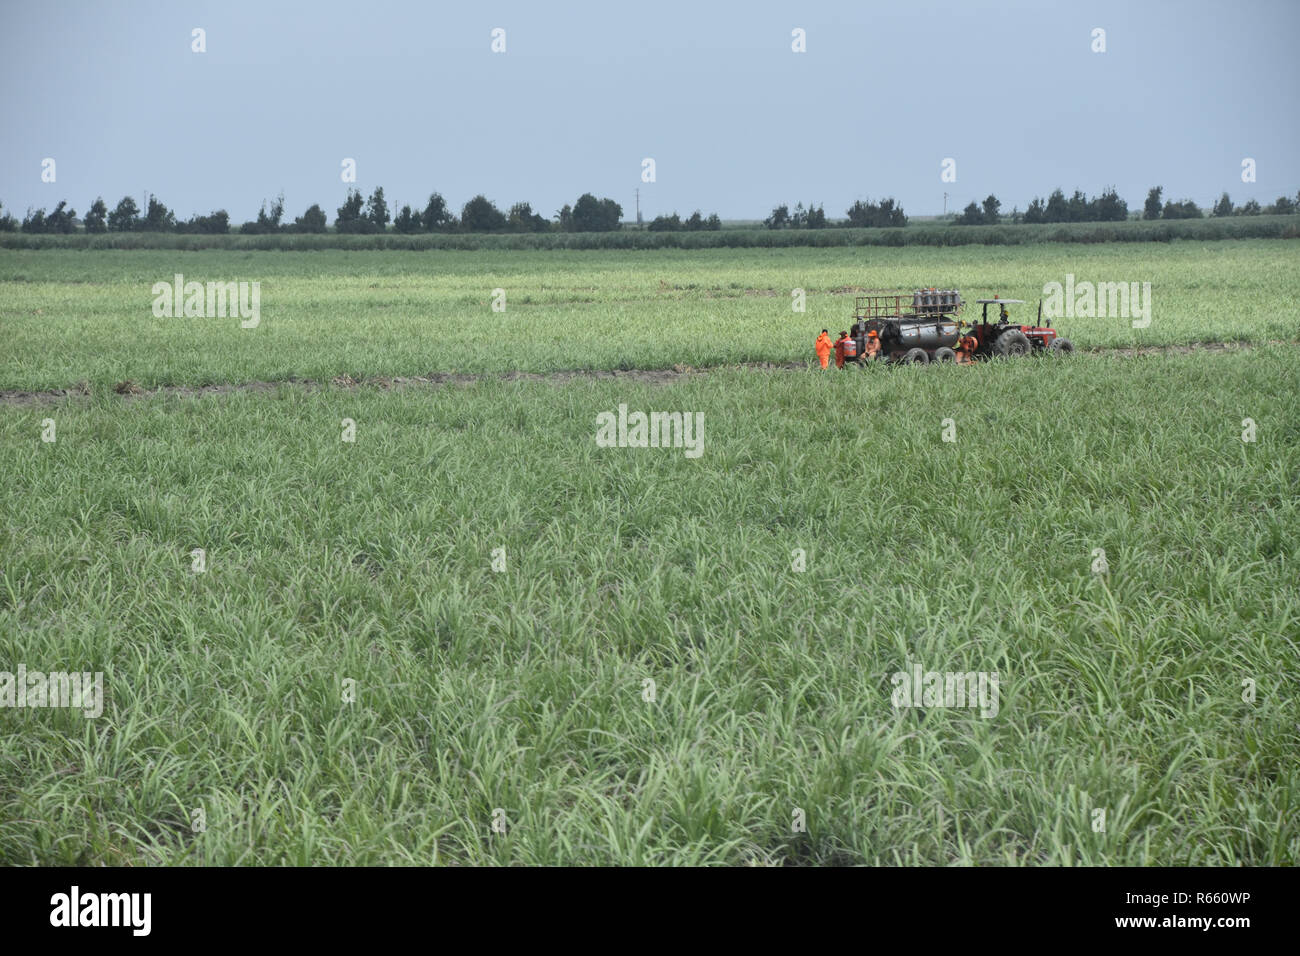 Workers in a Peruvian sugarcane field Stock Photo